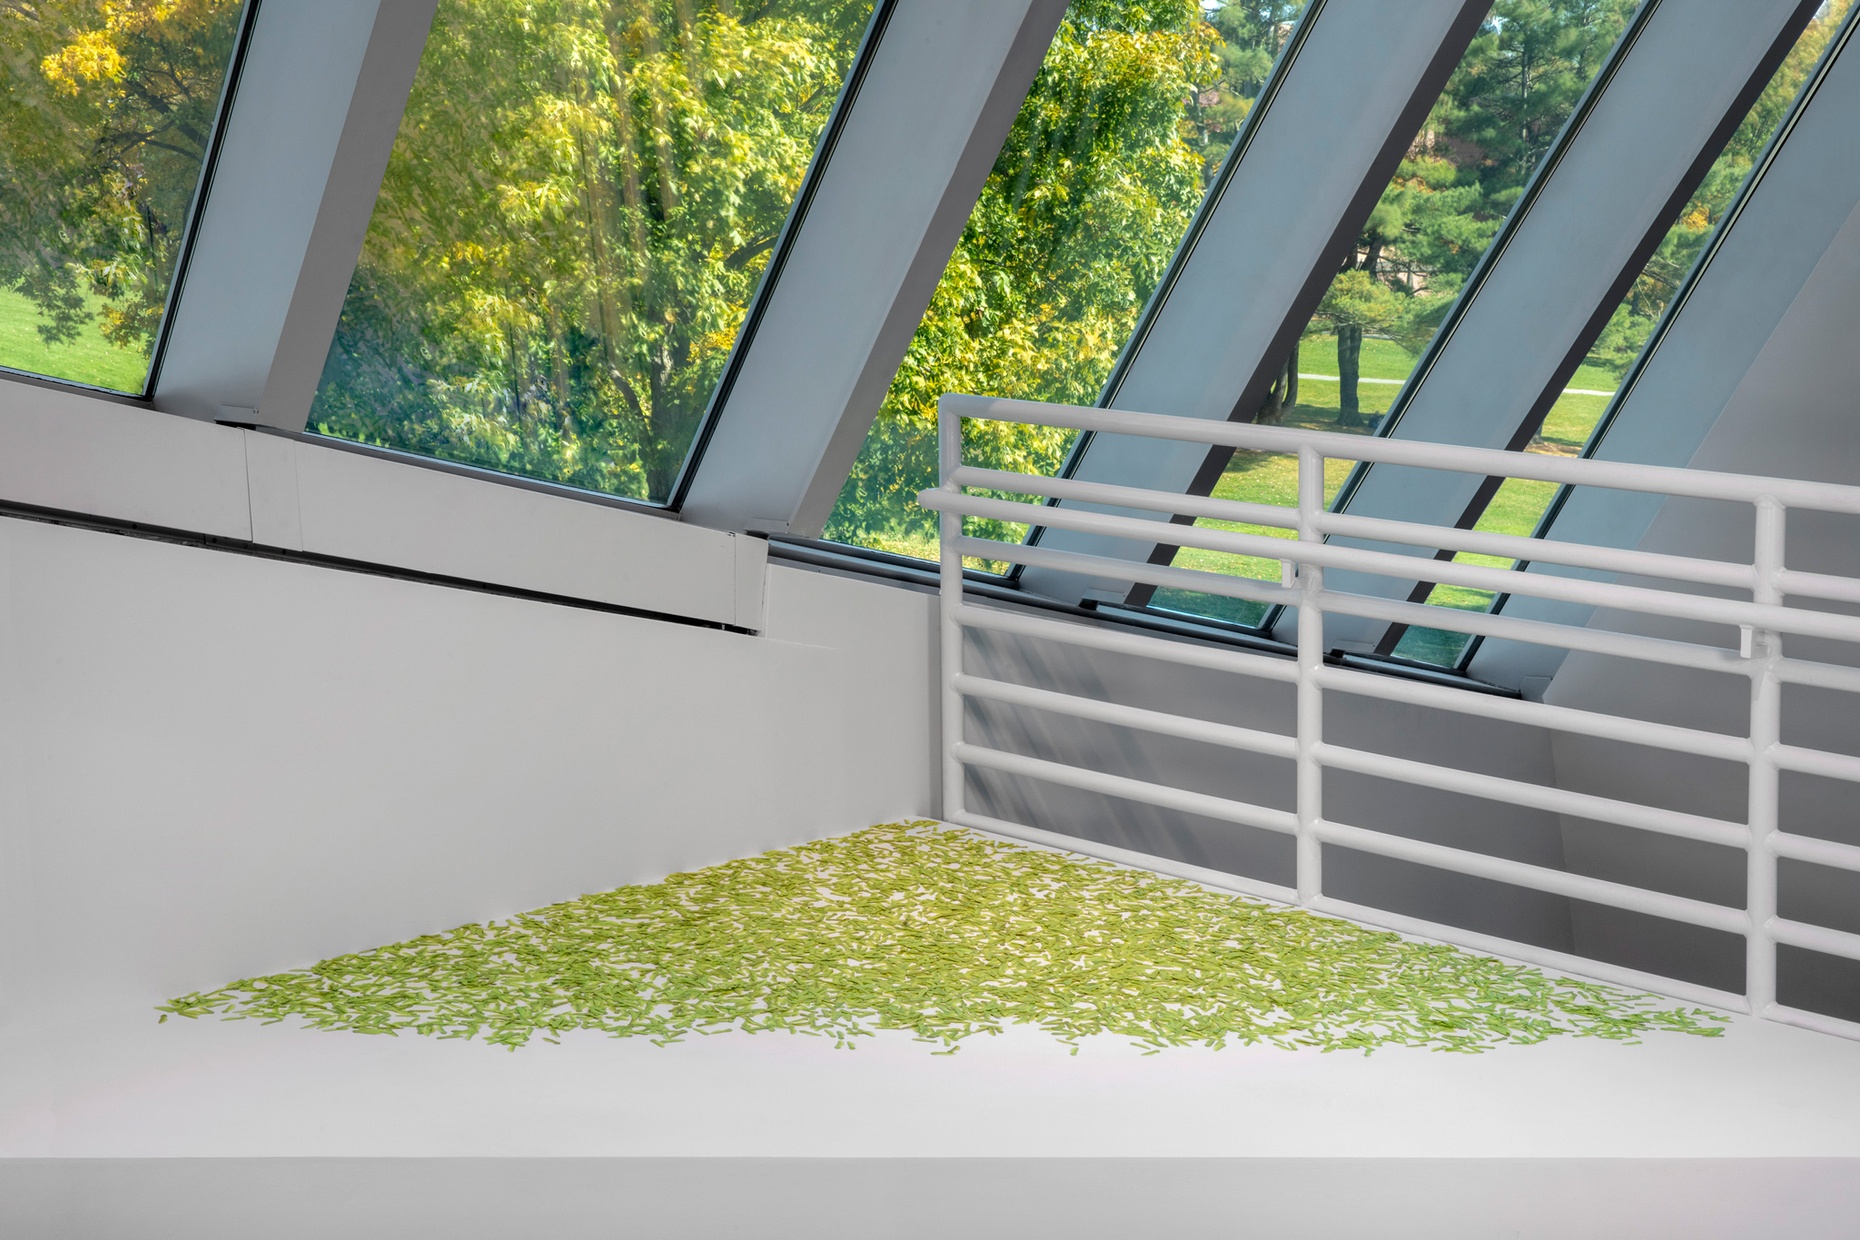 A close-up of white, triangular plinth with green maple seeds scattered on it underneath an angled ceiling made of glass through which green trees are visible.